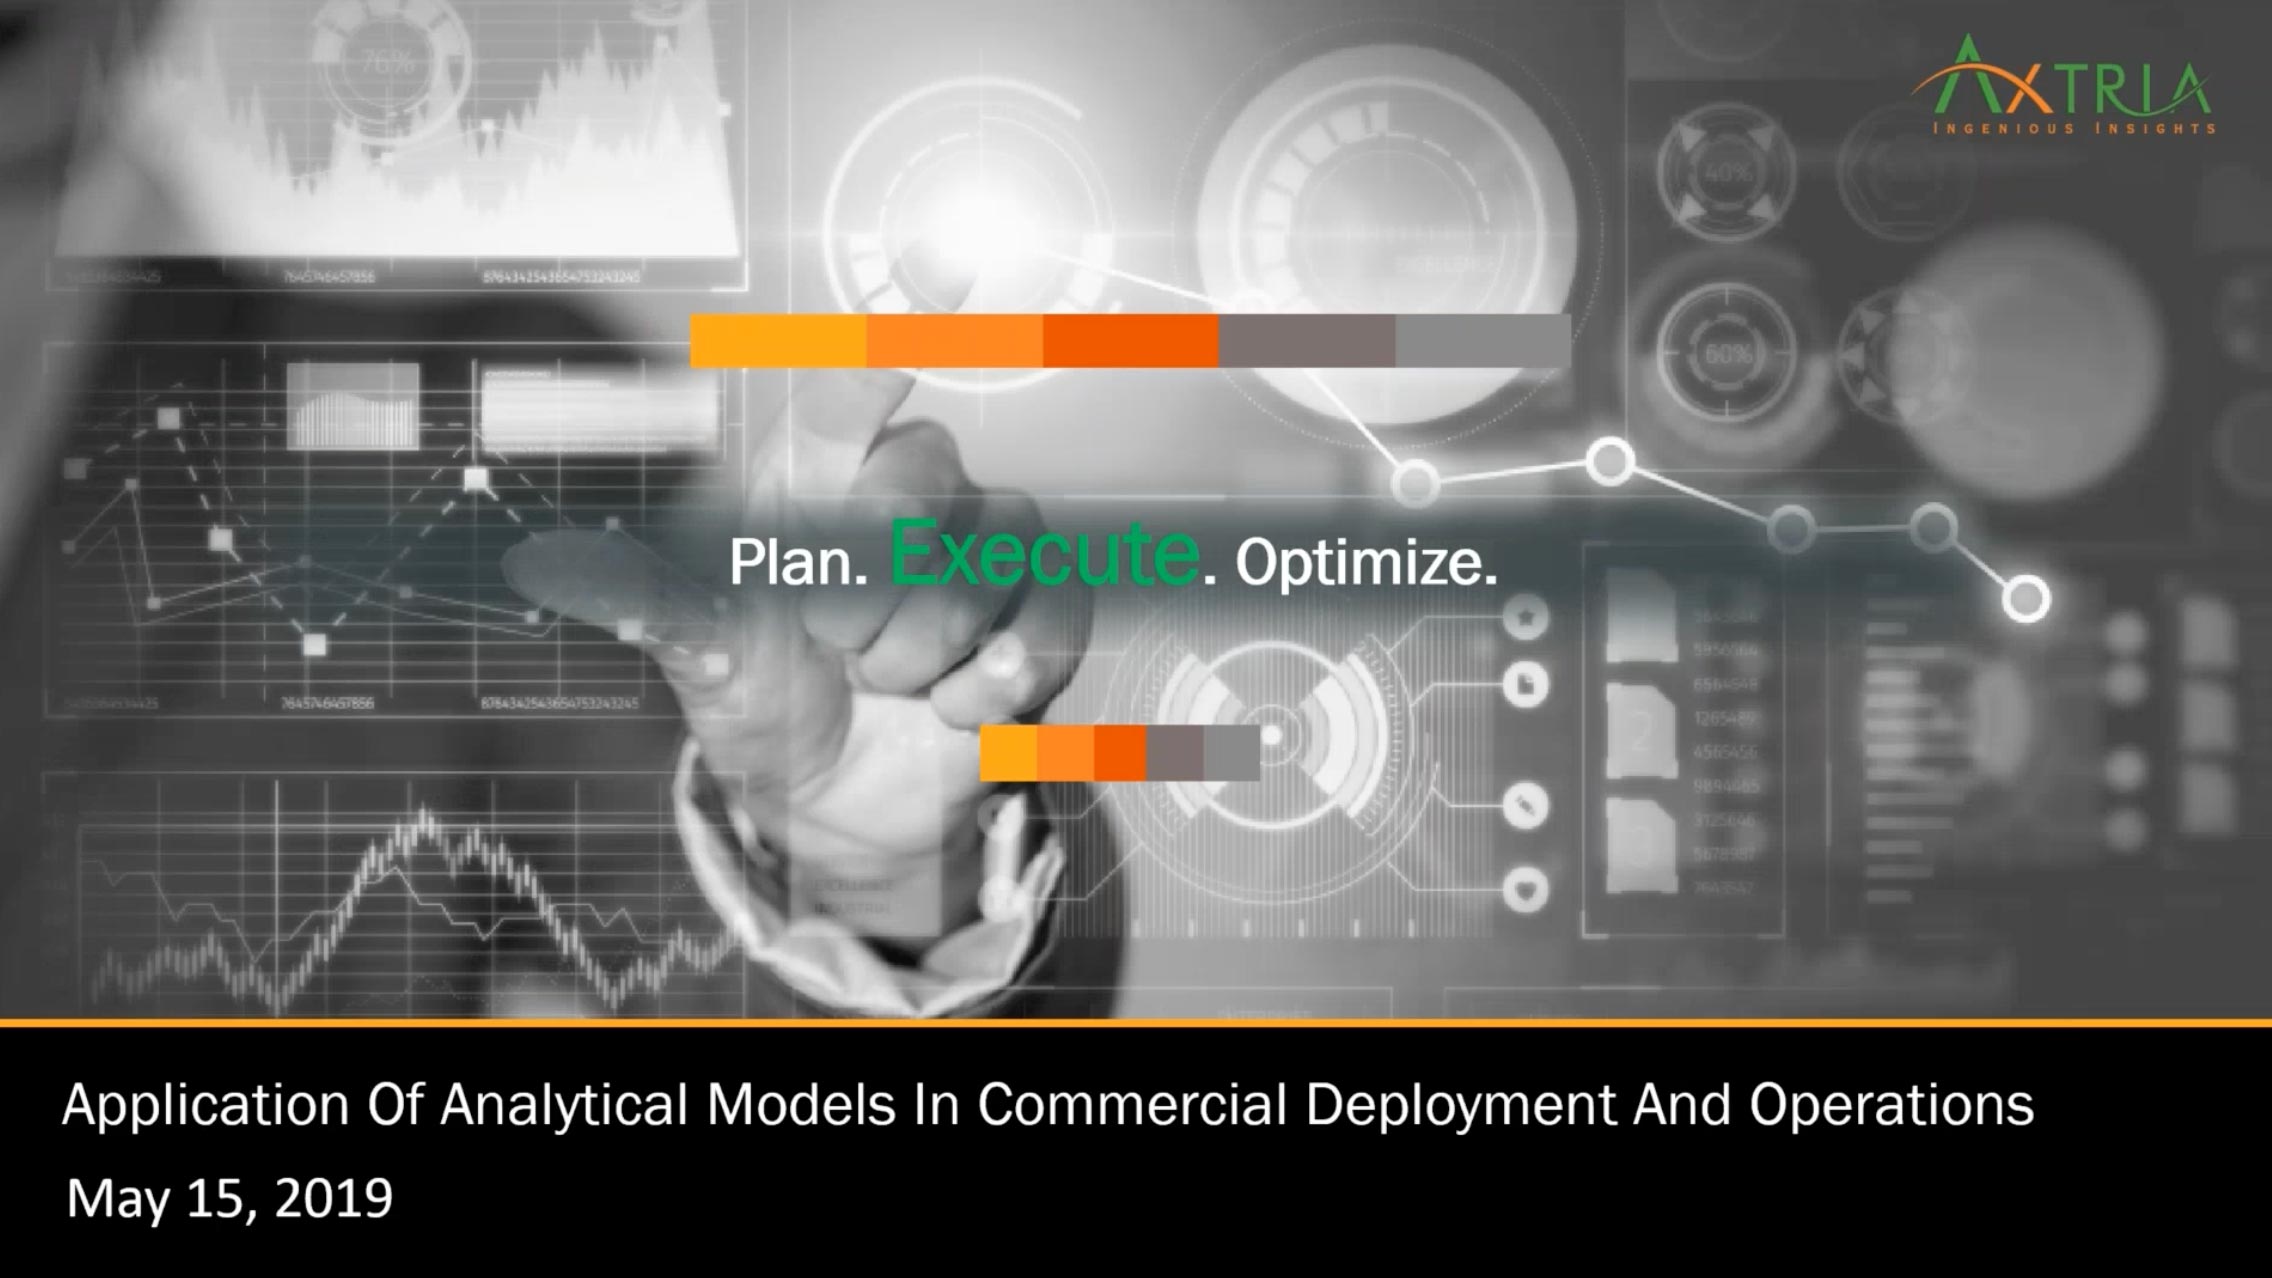 Application of Analytical Models in Commercial Deployment and Operations: Current State and Evolving Industry Trends